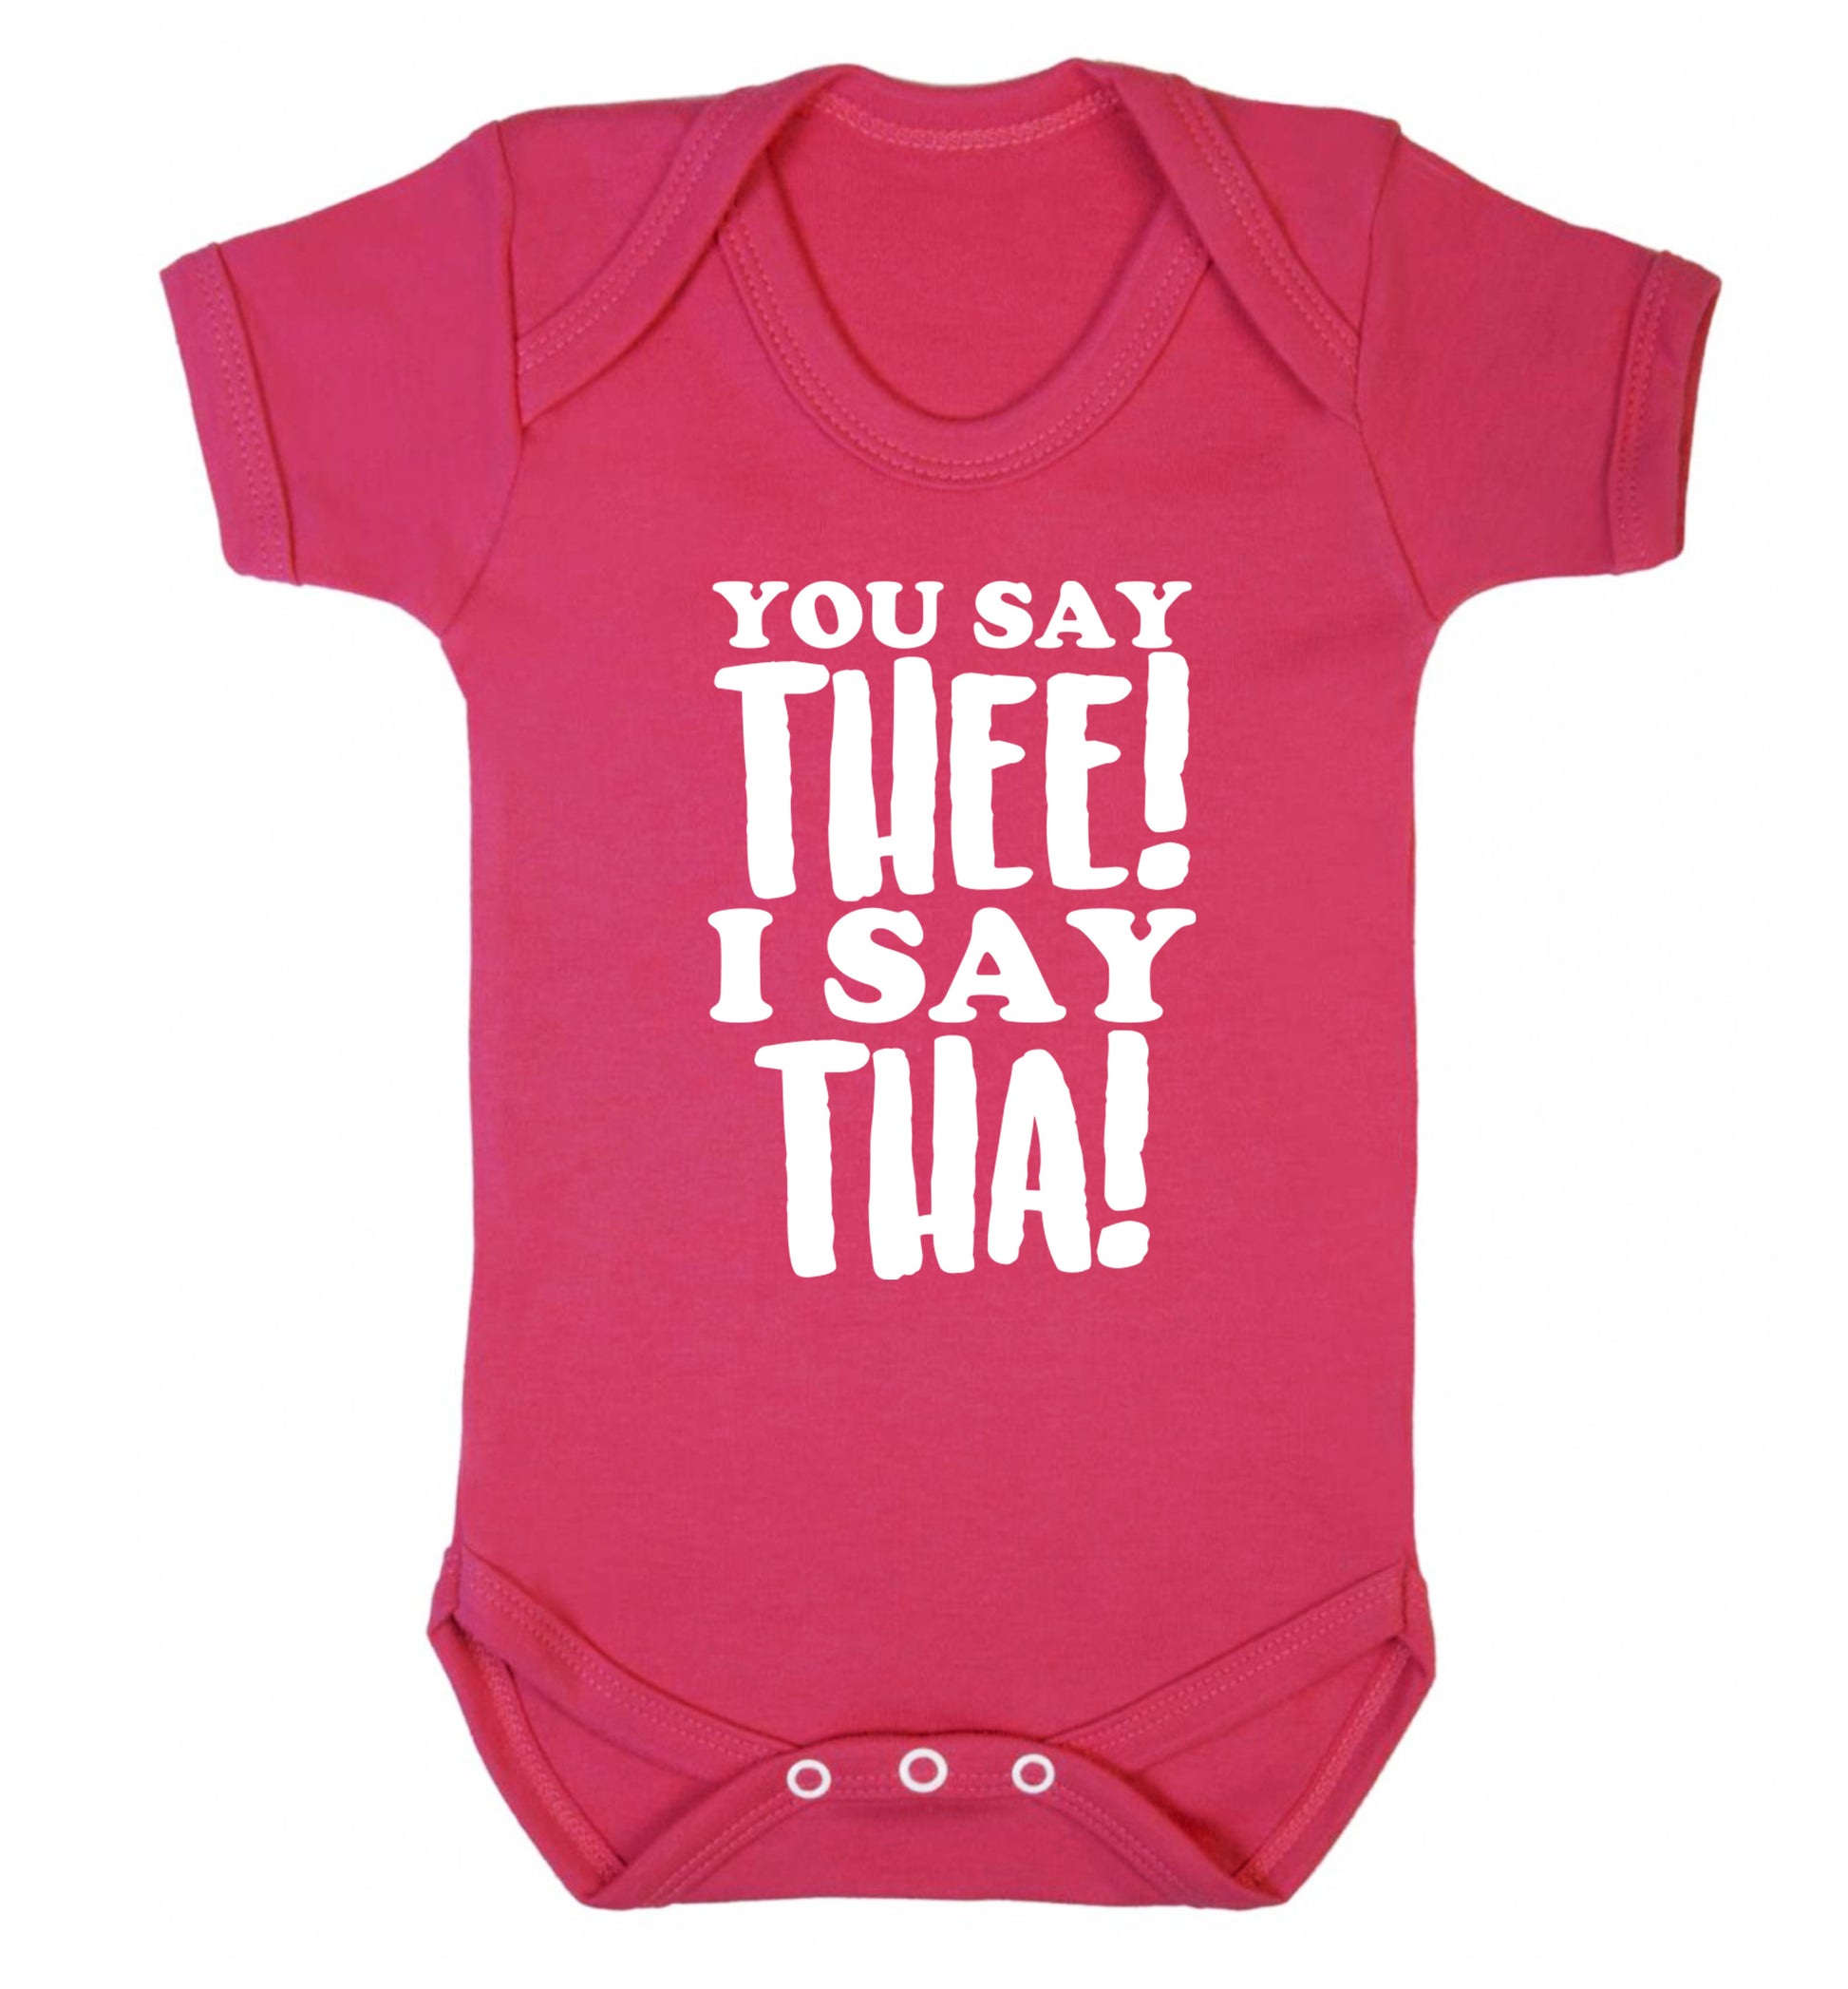 You say thee I say tha Baby Vest dark pink 18-24 months